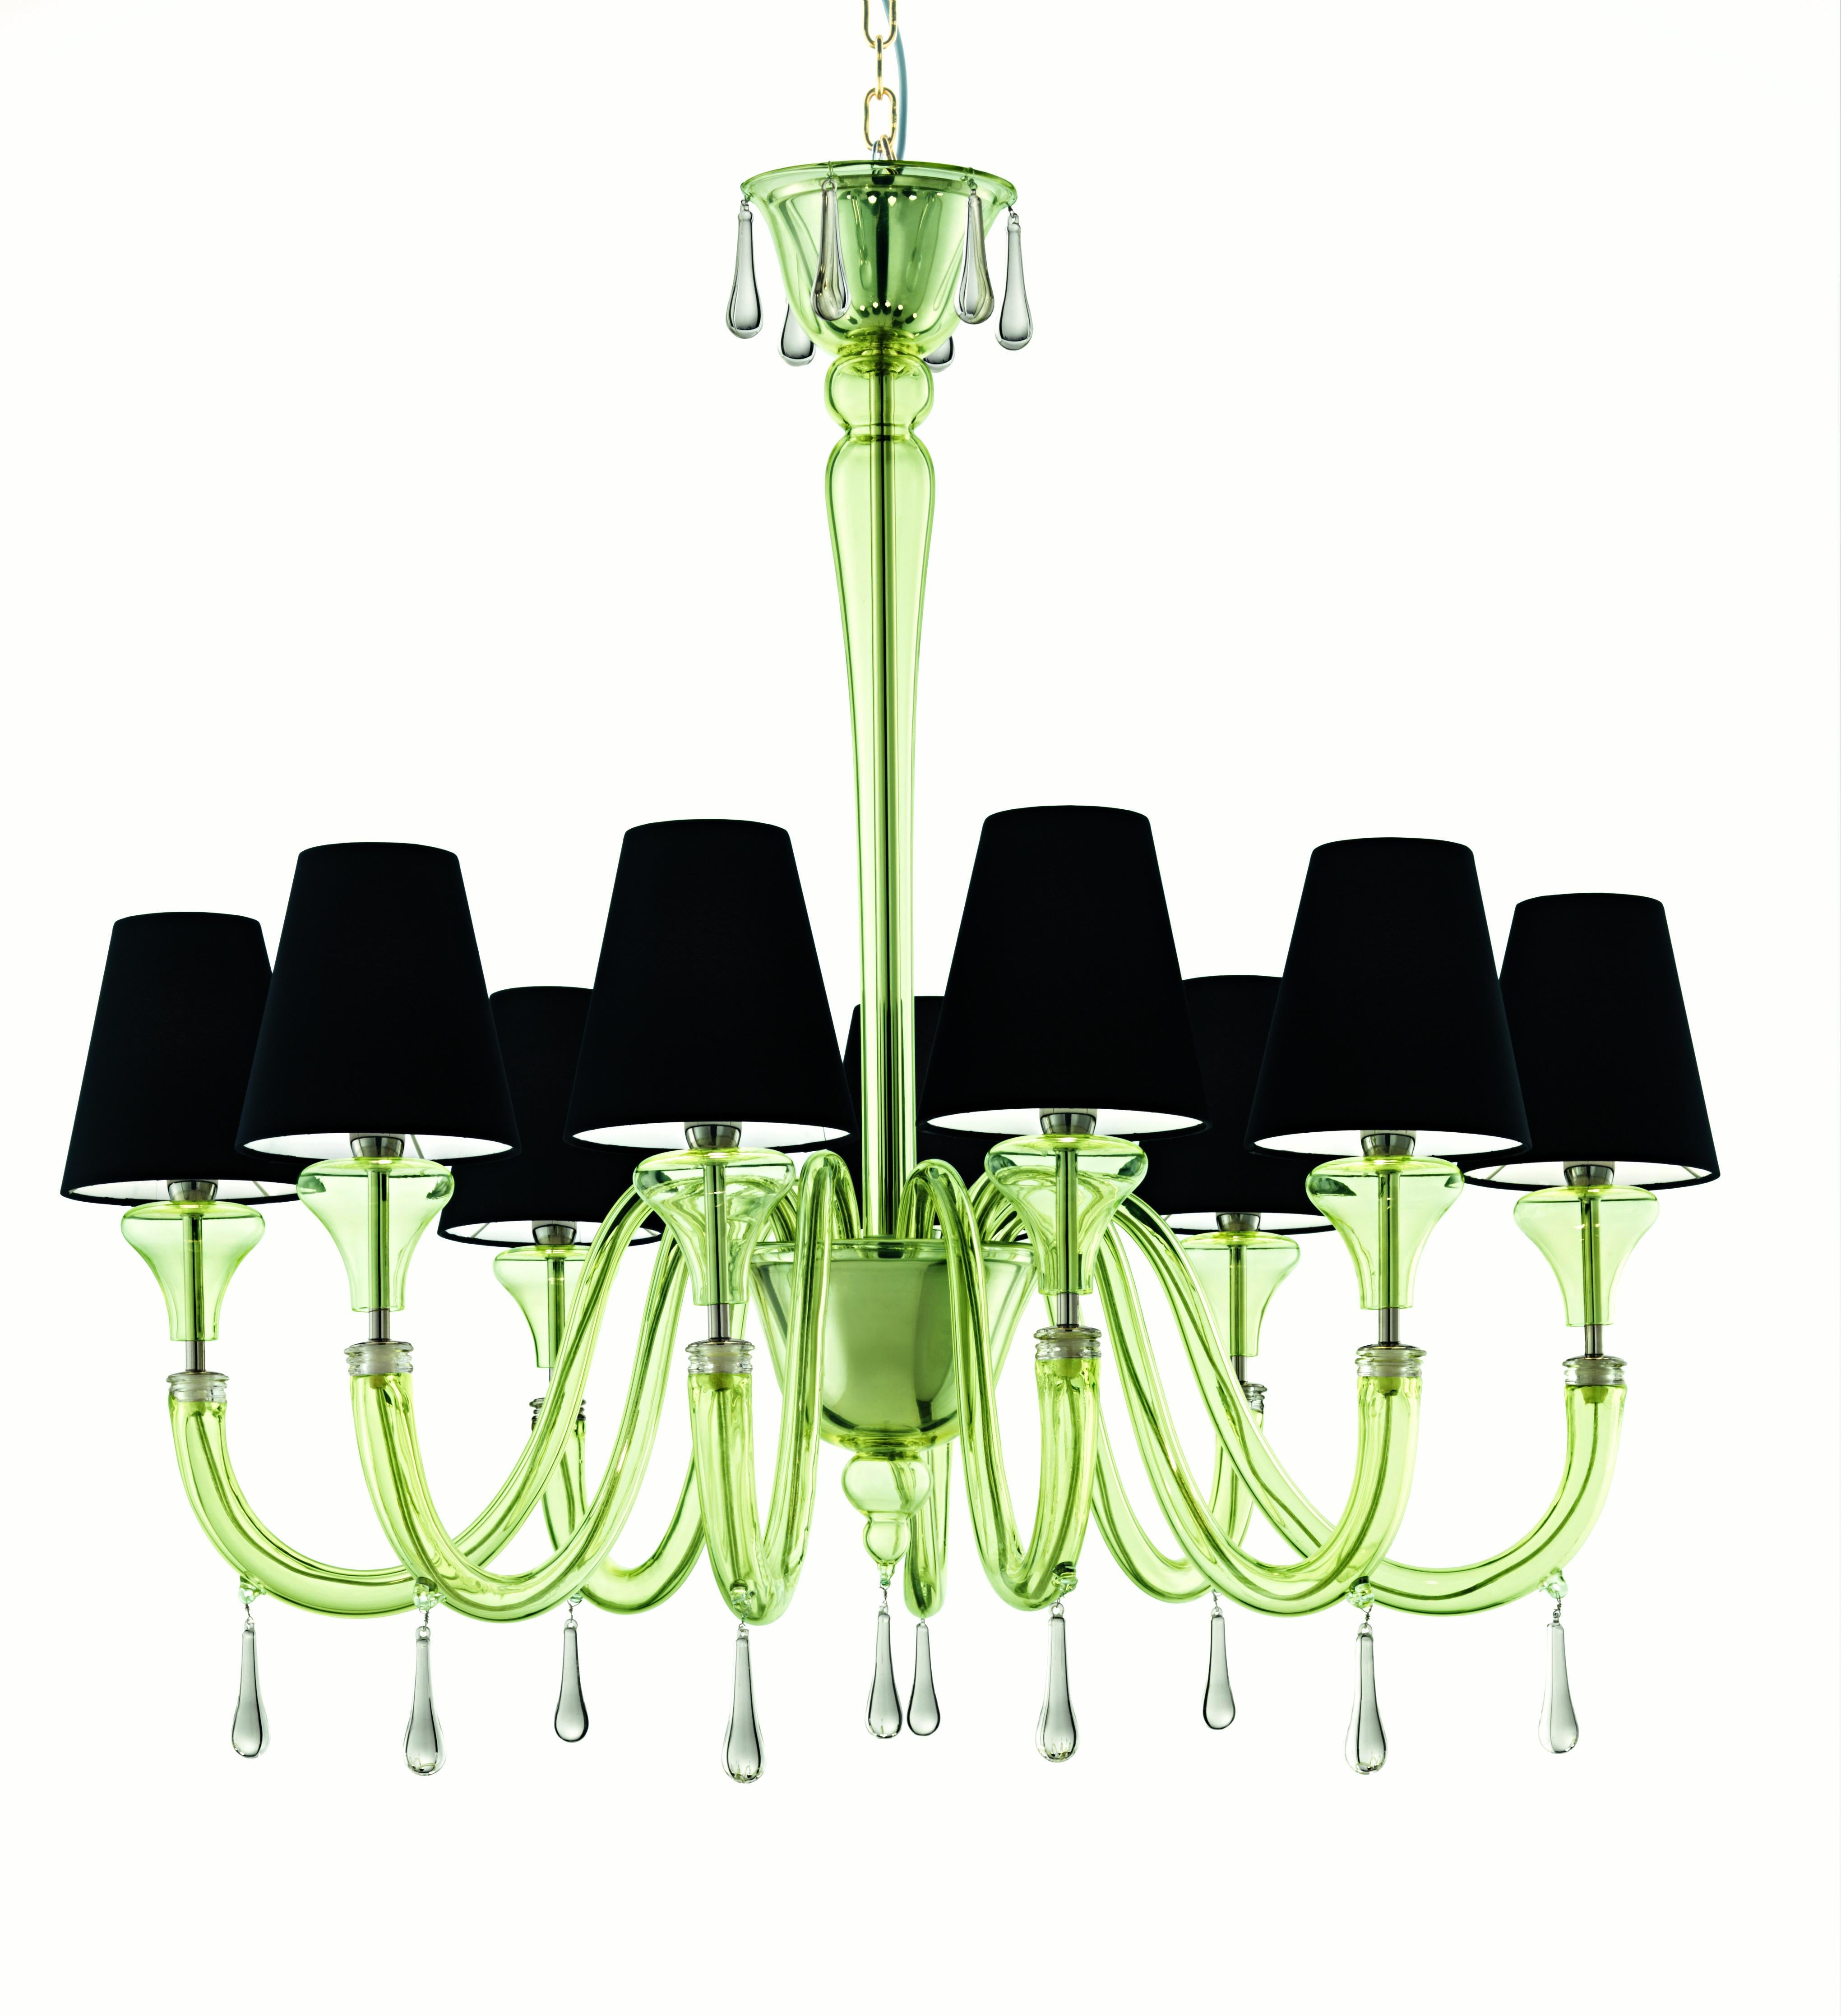 Green (Liquid Citron_EL) Maryland 5587 09 Chandelier in Glass with Black Shade, by Barovier & Toso 2